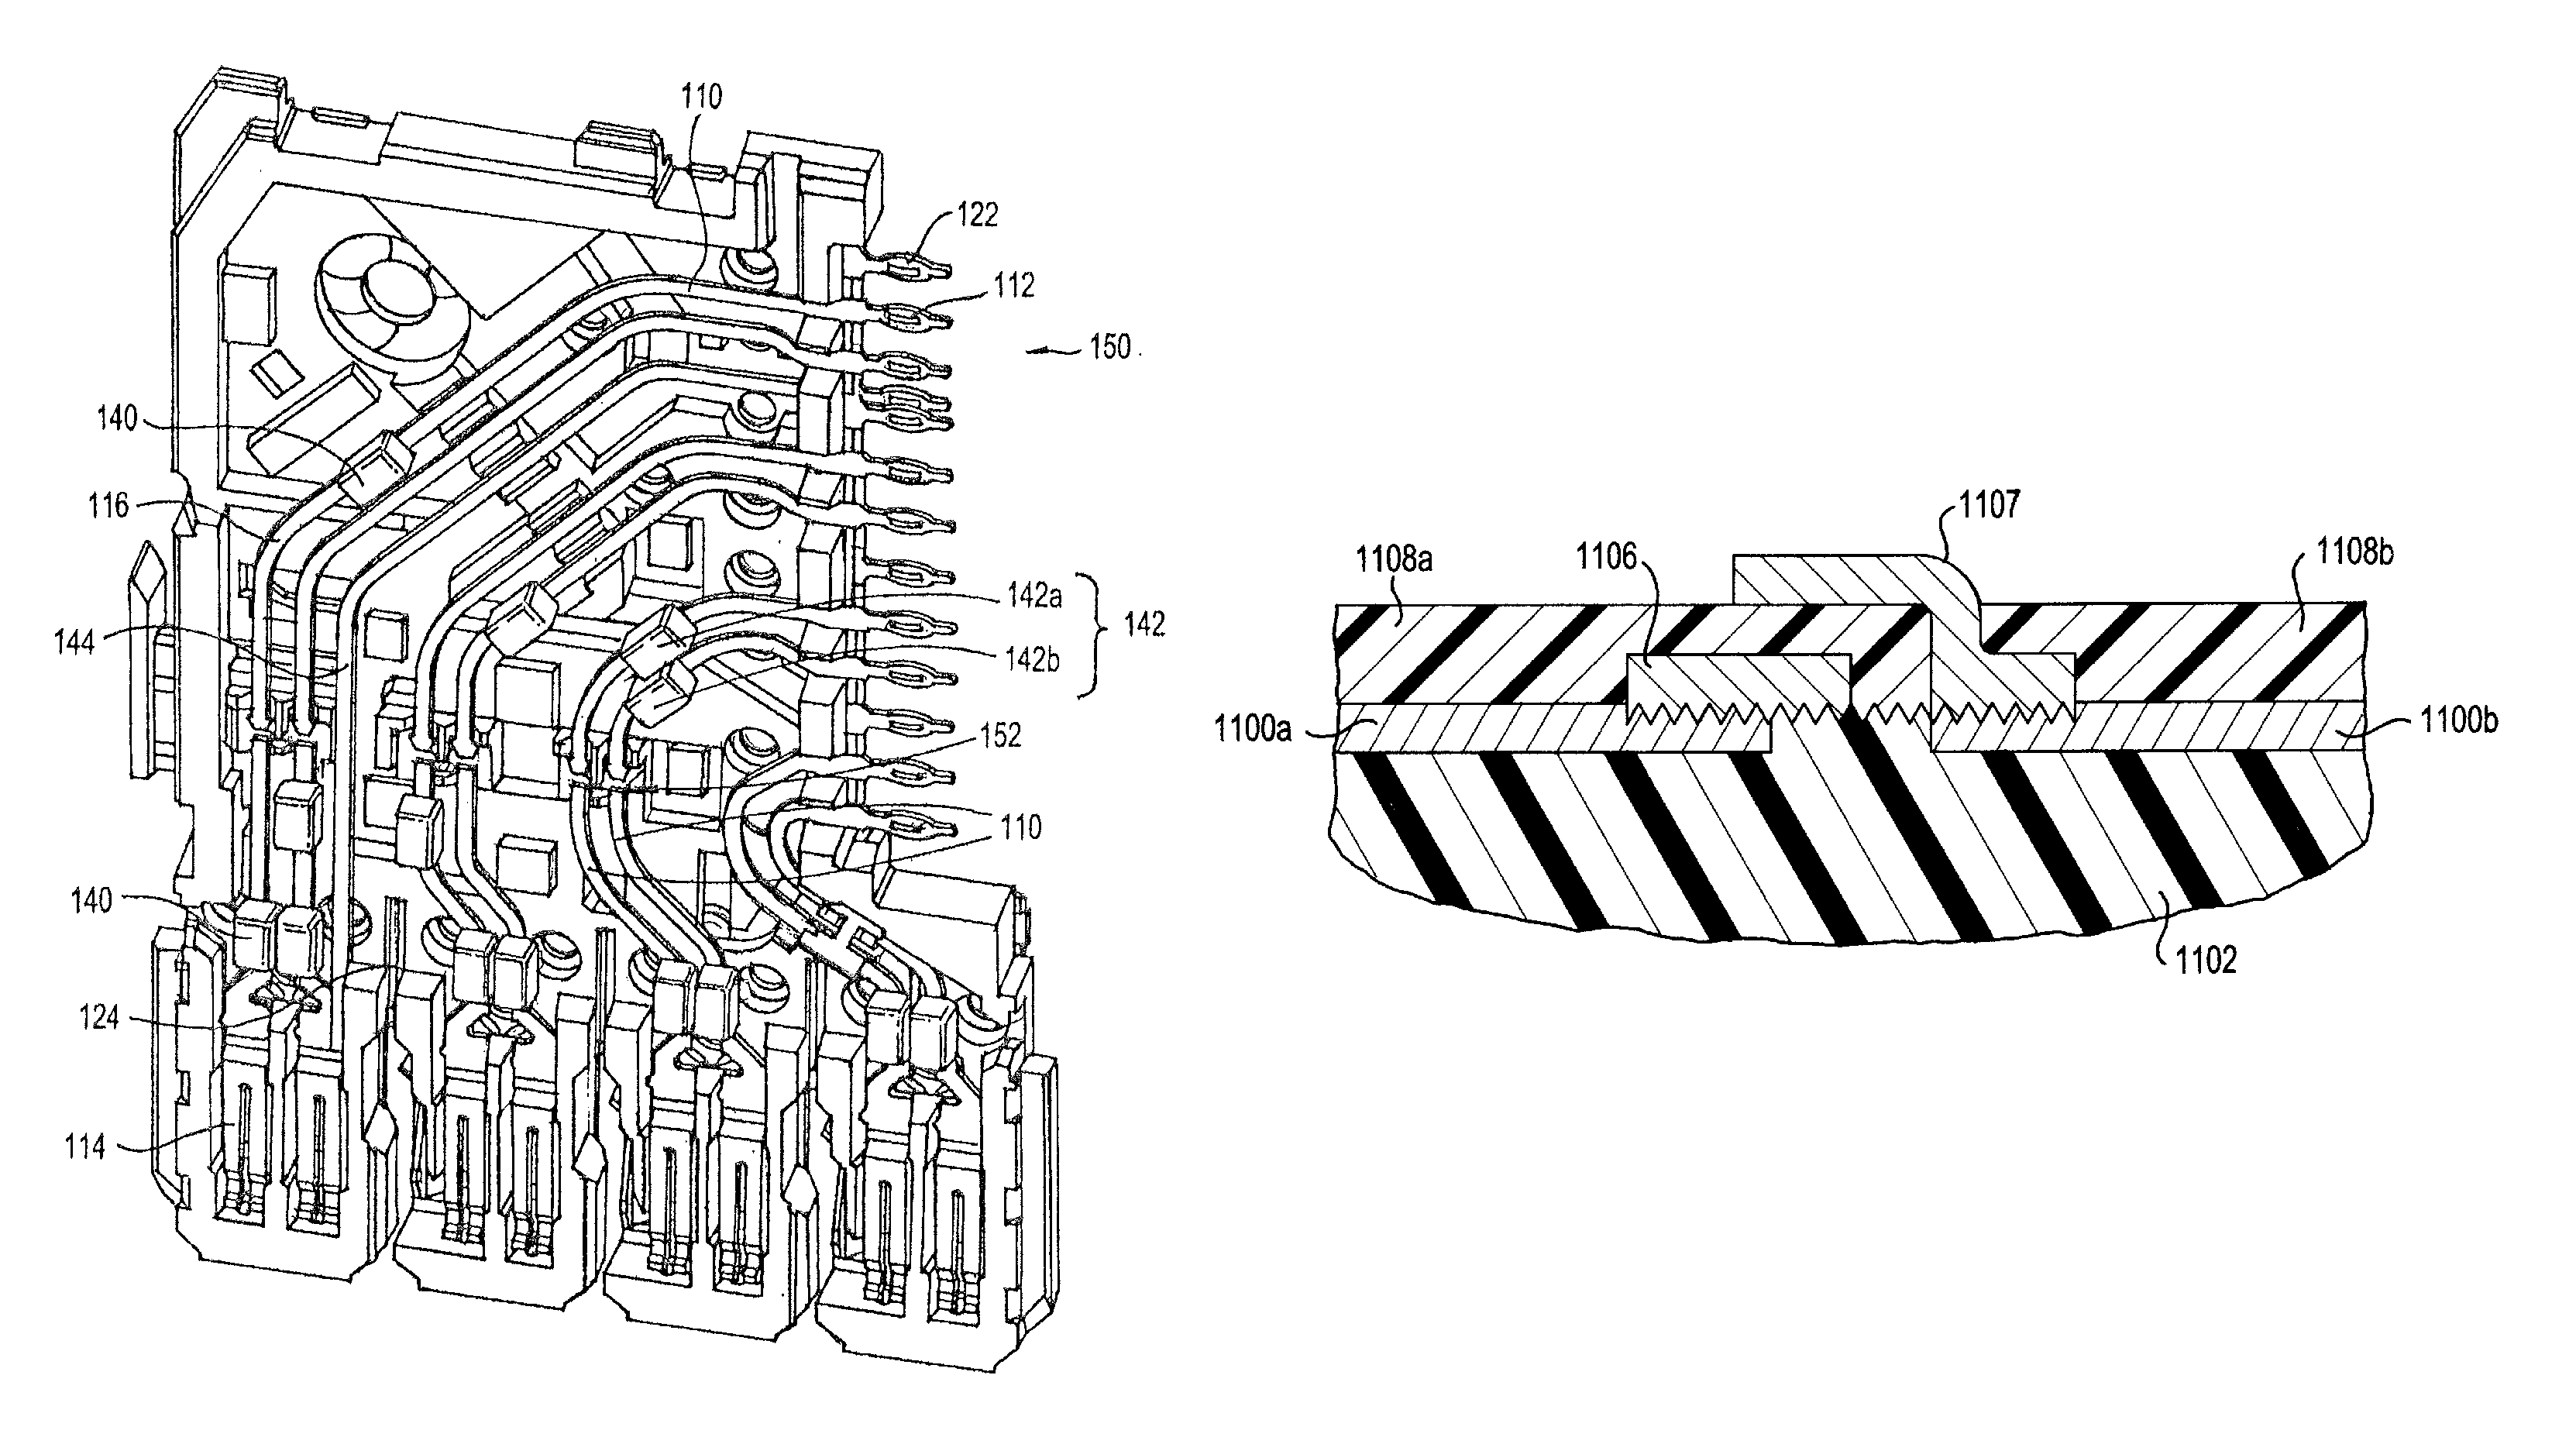 Electrical connector having thick film layers